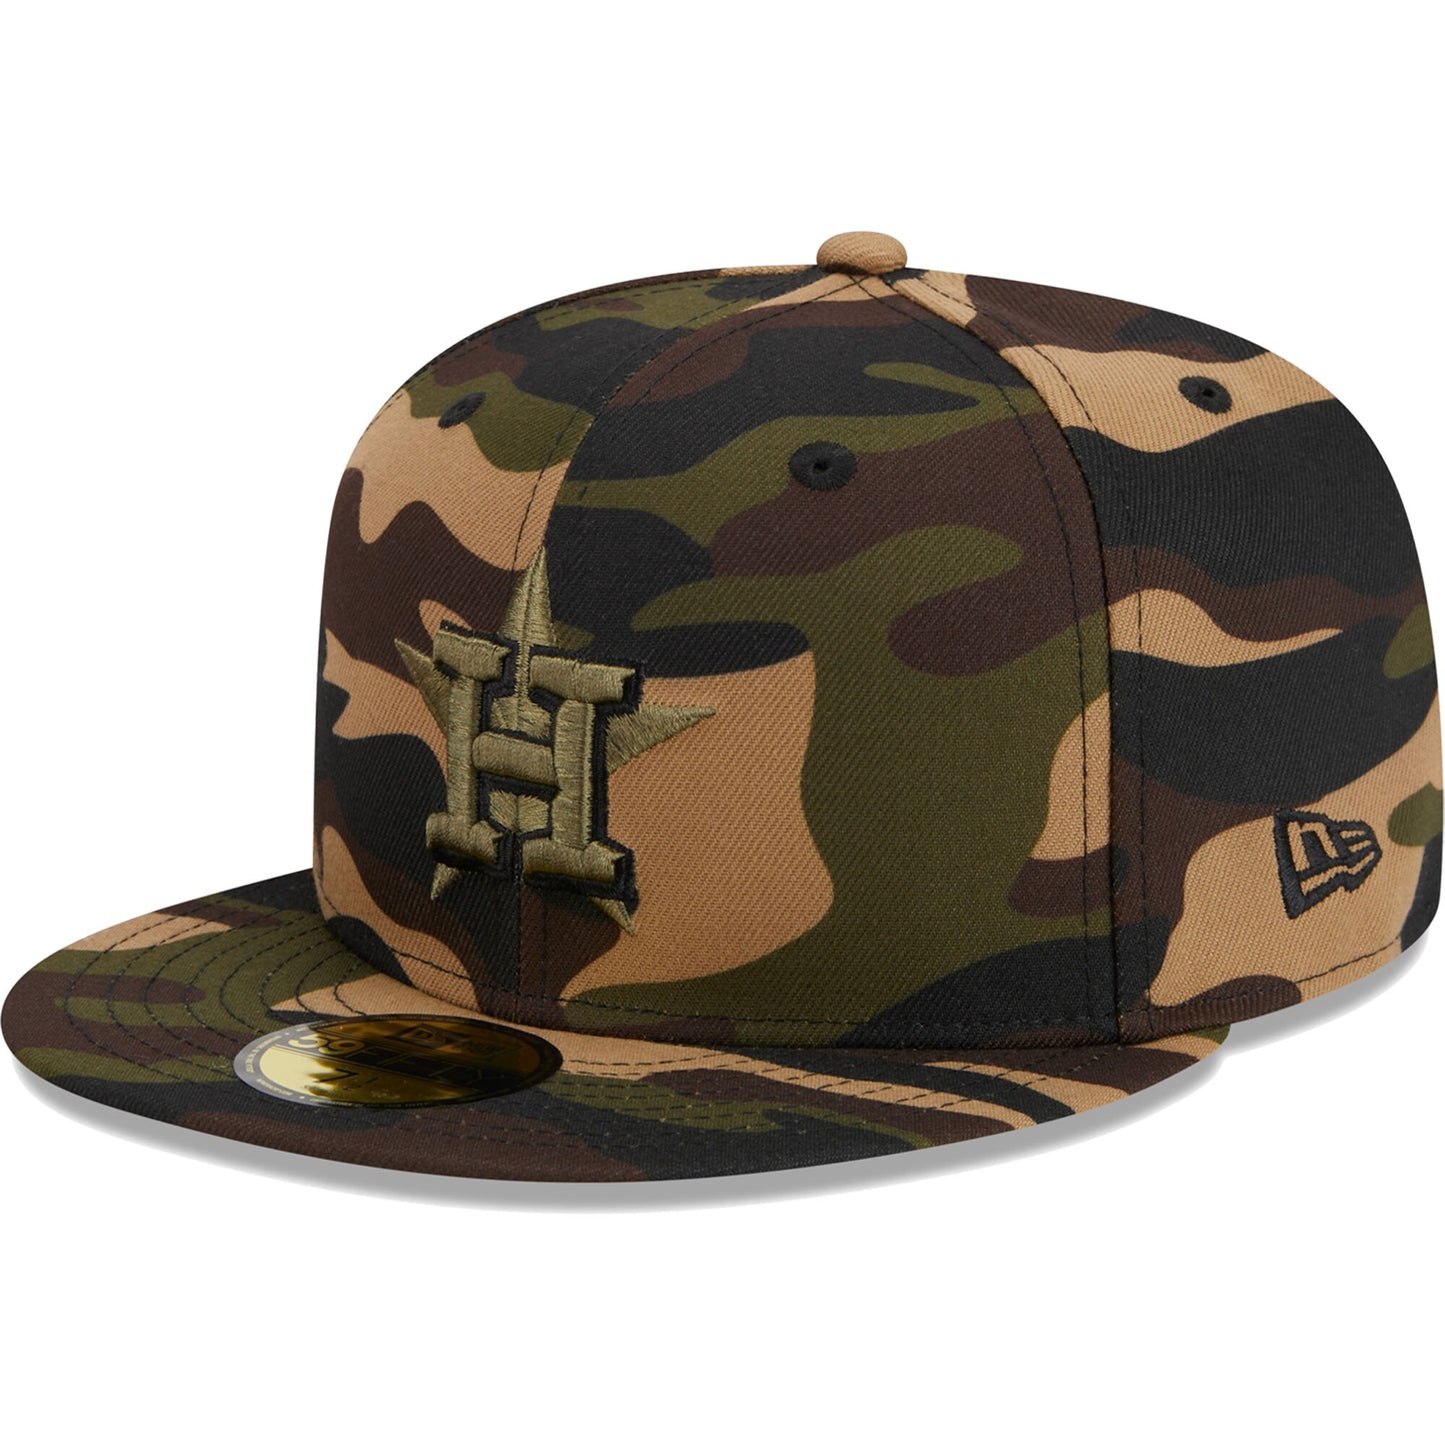 Houston Astros New Era Autumn 59FIFTY Fitted Hat - Camo